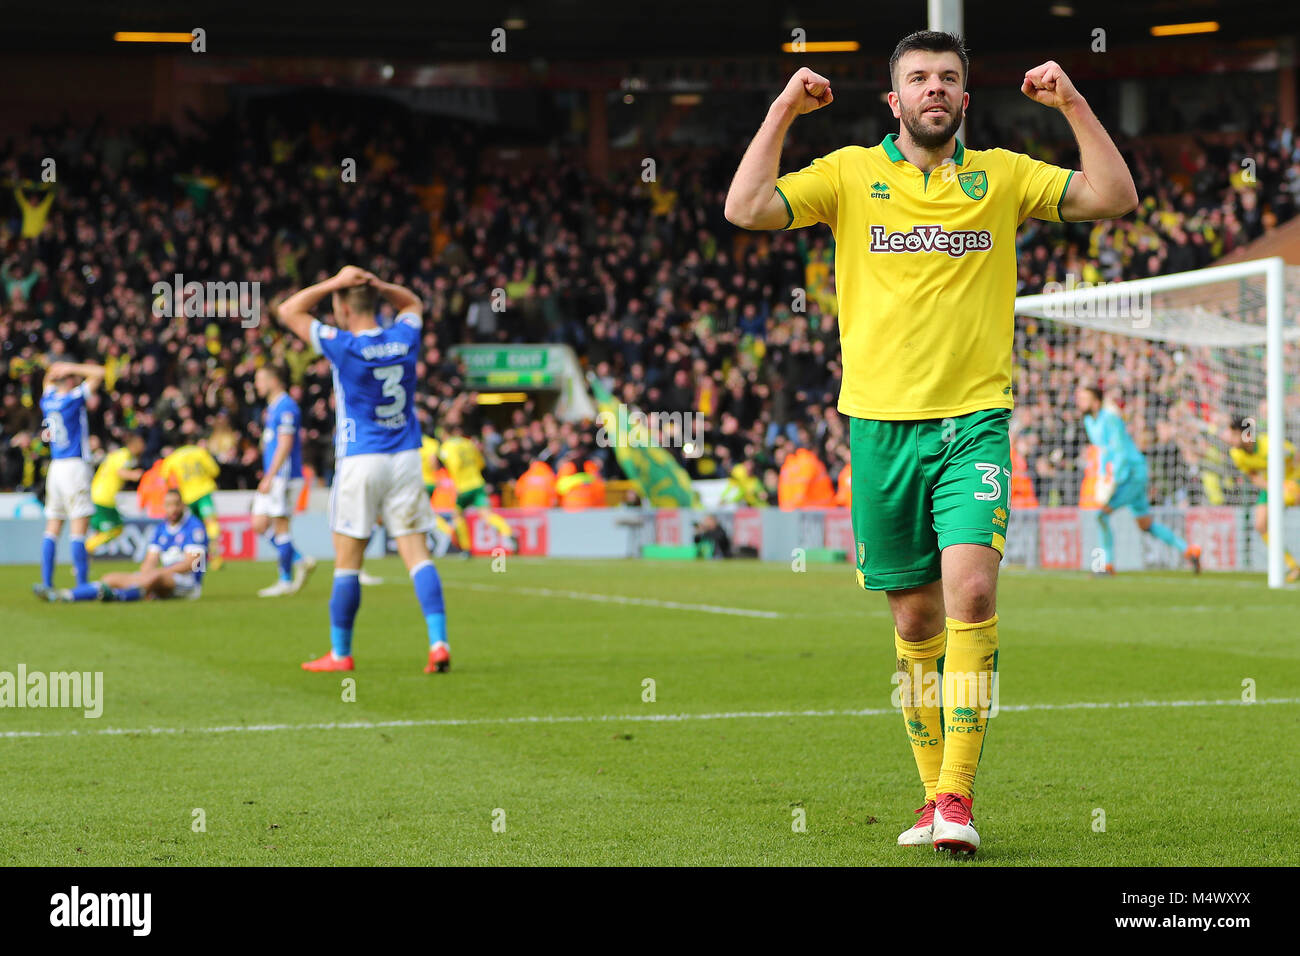 Norwich, UK. 18th Feb, 2018. Grant Hanley of Norwich City celebrates after the equalising goal from team mate, Timm Klose top make it 1-1 - Norwich City v Ipswich Town, Sky Bet Championship, Carrow Road, Norwich - 18th February 2018. Credit: Richard Calver/Alamy Live News Stock Photo